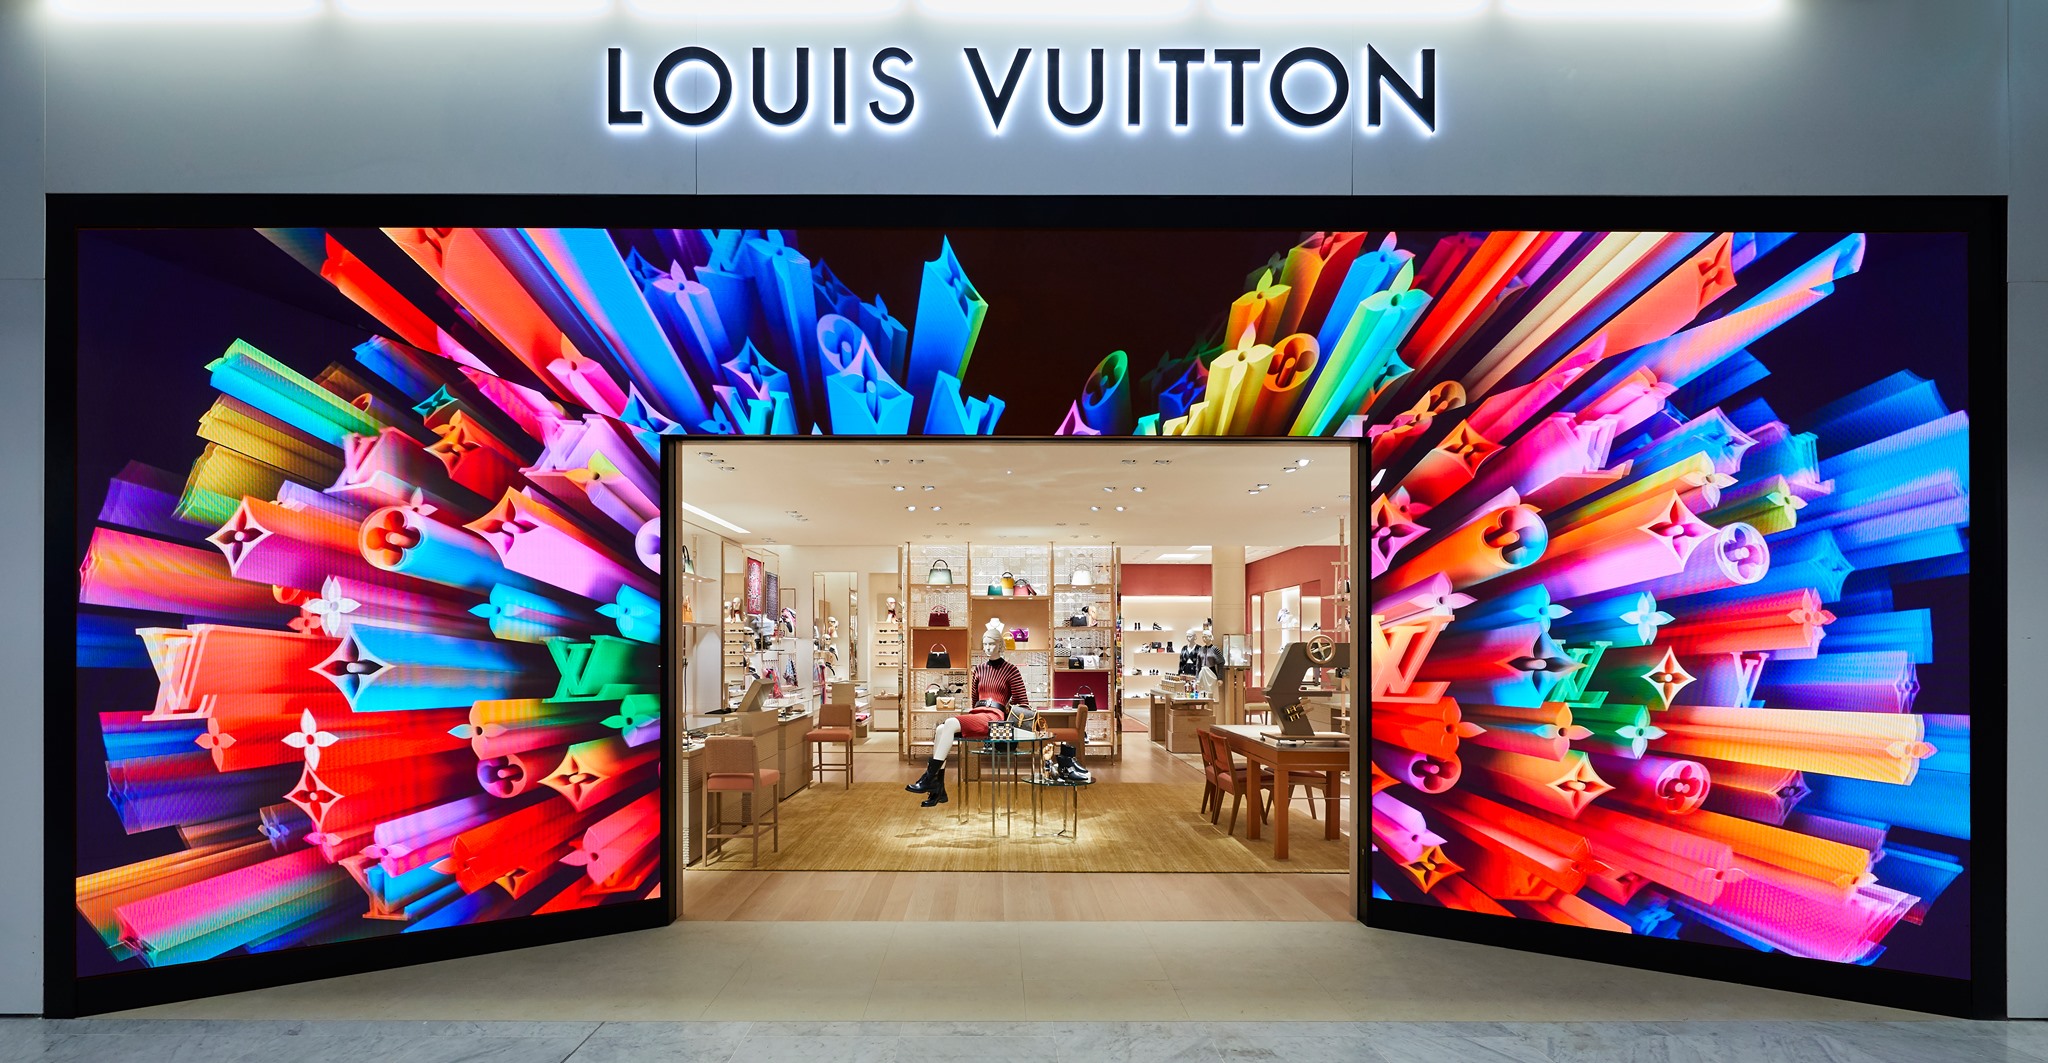 Louis Vuitton Union Square - Handbags & Packs, Luggage, Shoes - Phone Number - Hours - Photos ...